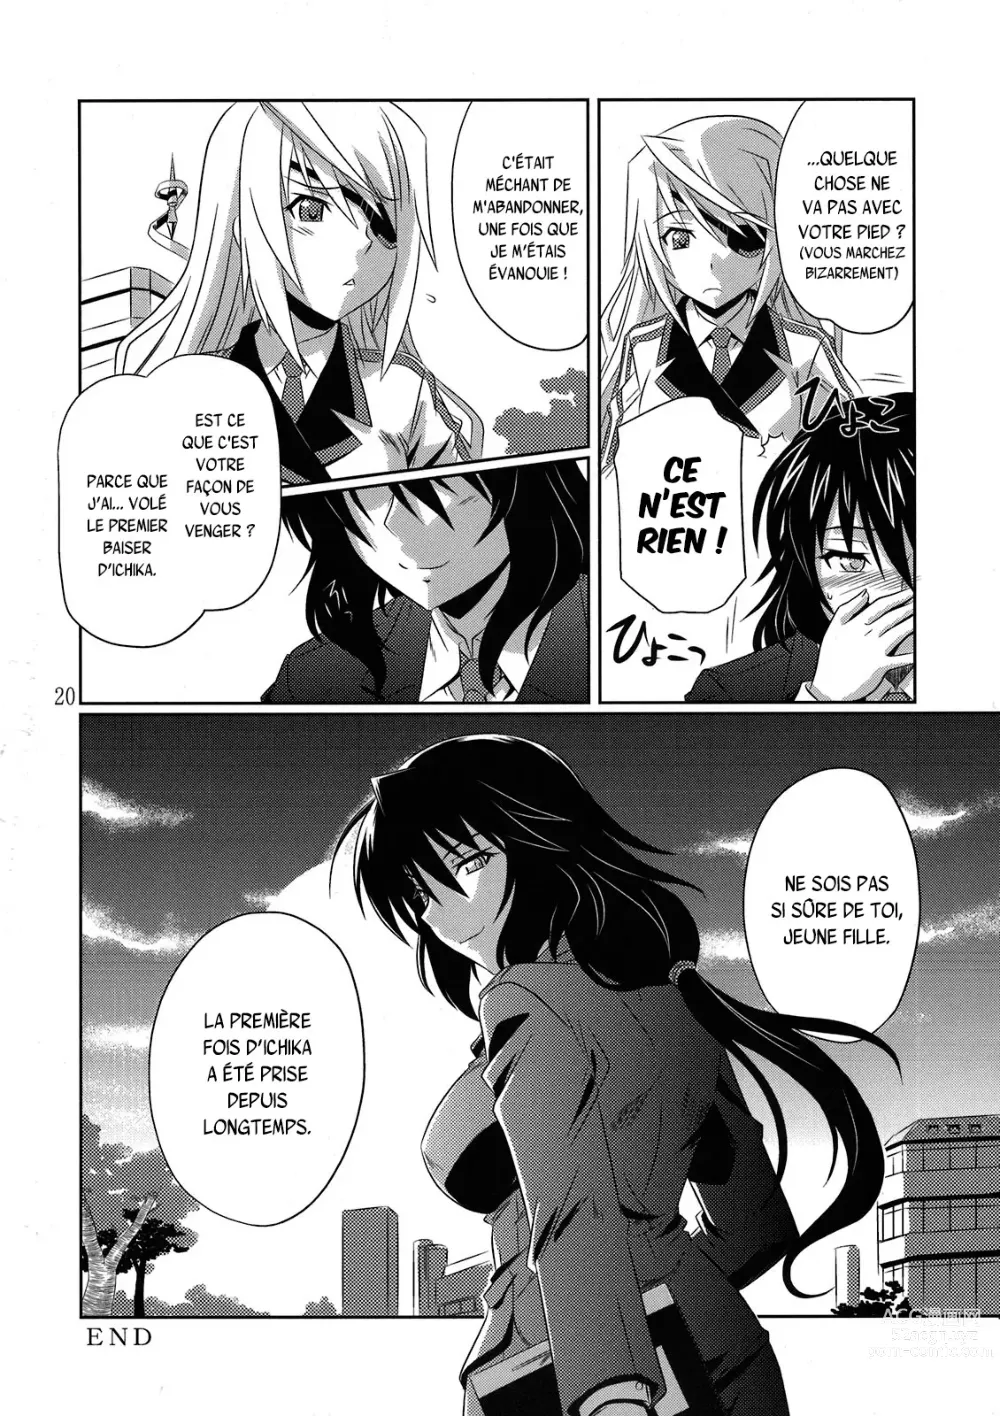 Page 20 of doujinshi is Incest Strategy (decensored)